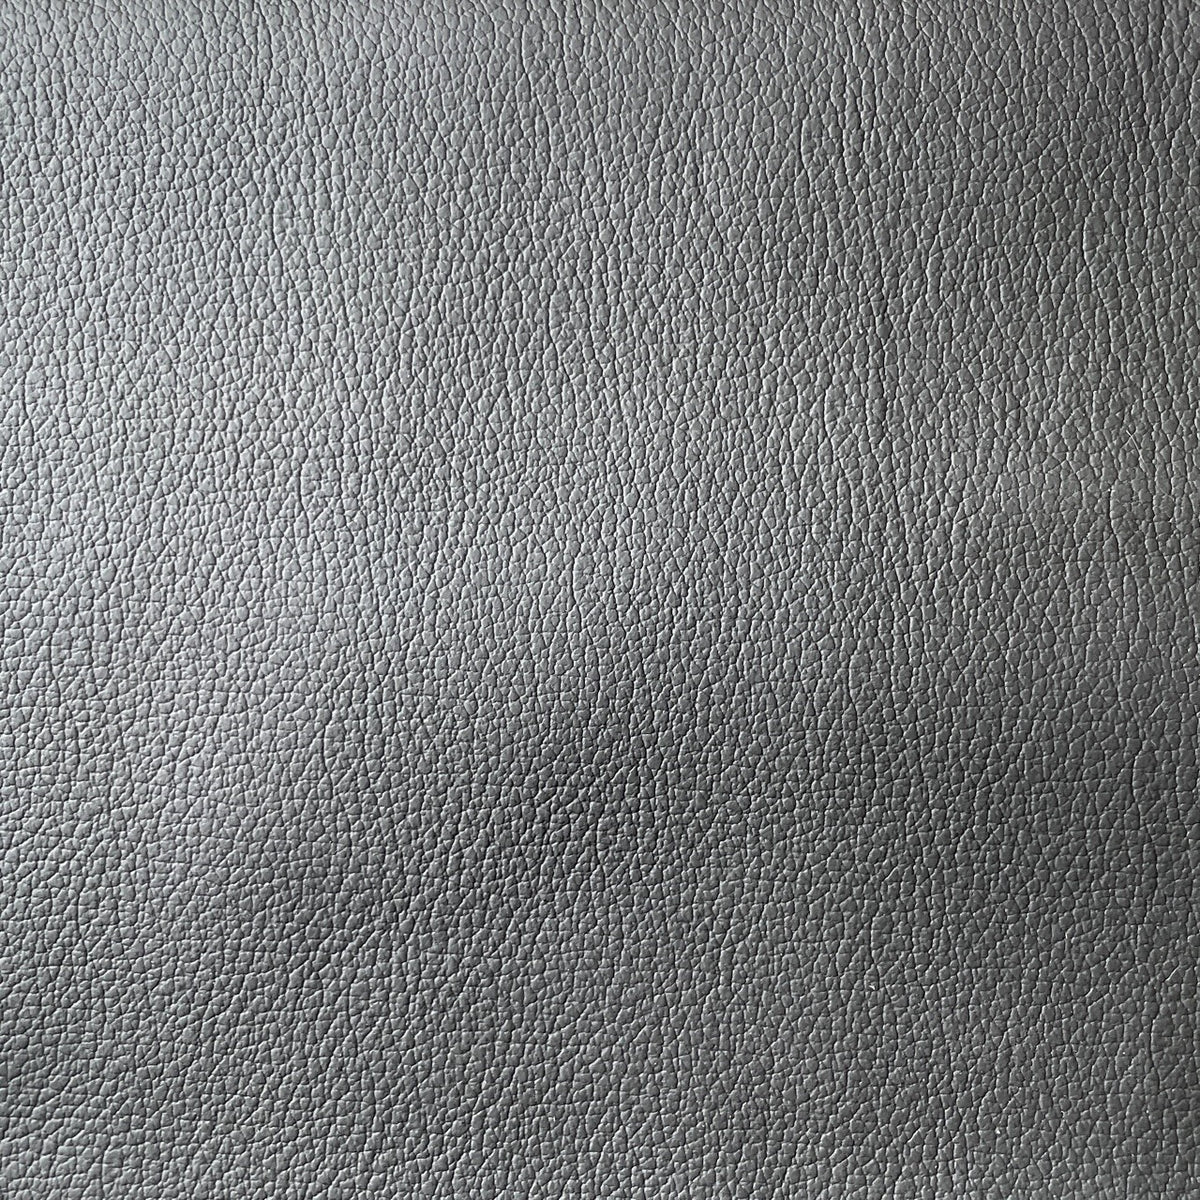 Upholstery Cow Hide #2 | Grey | 1.0/1.2mm | 49 sq.ft | $340 ea.